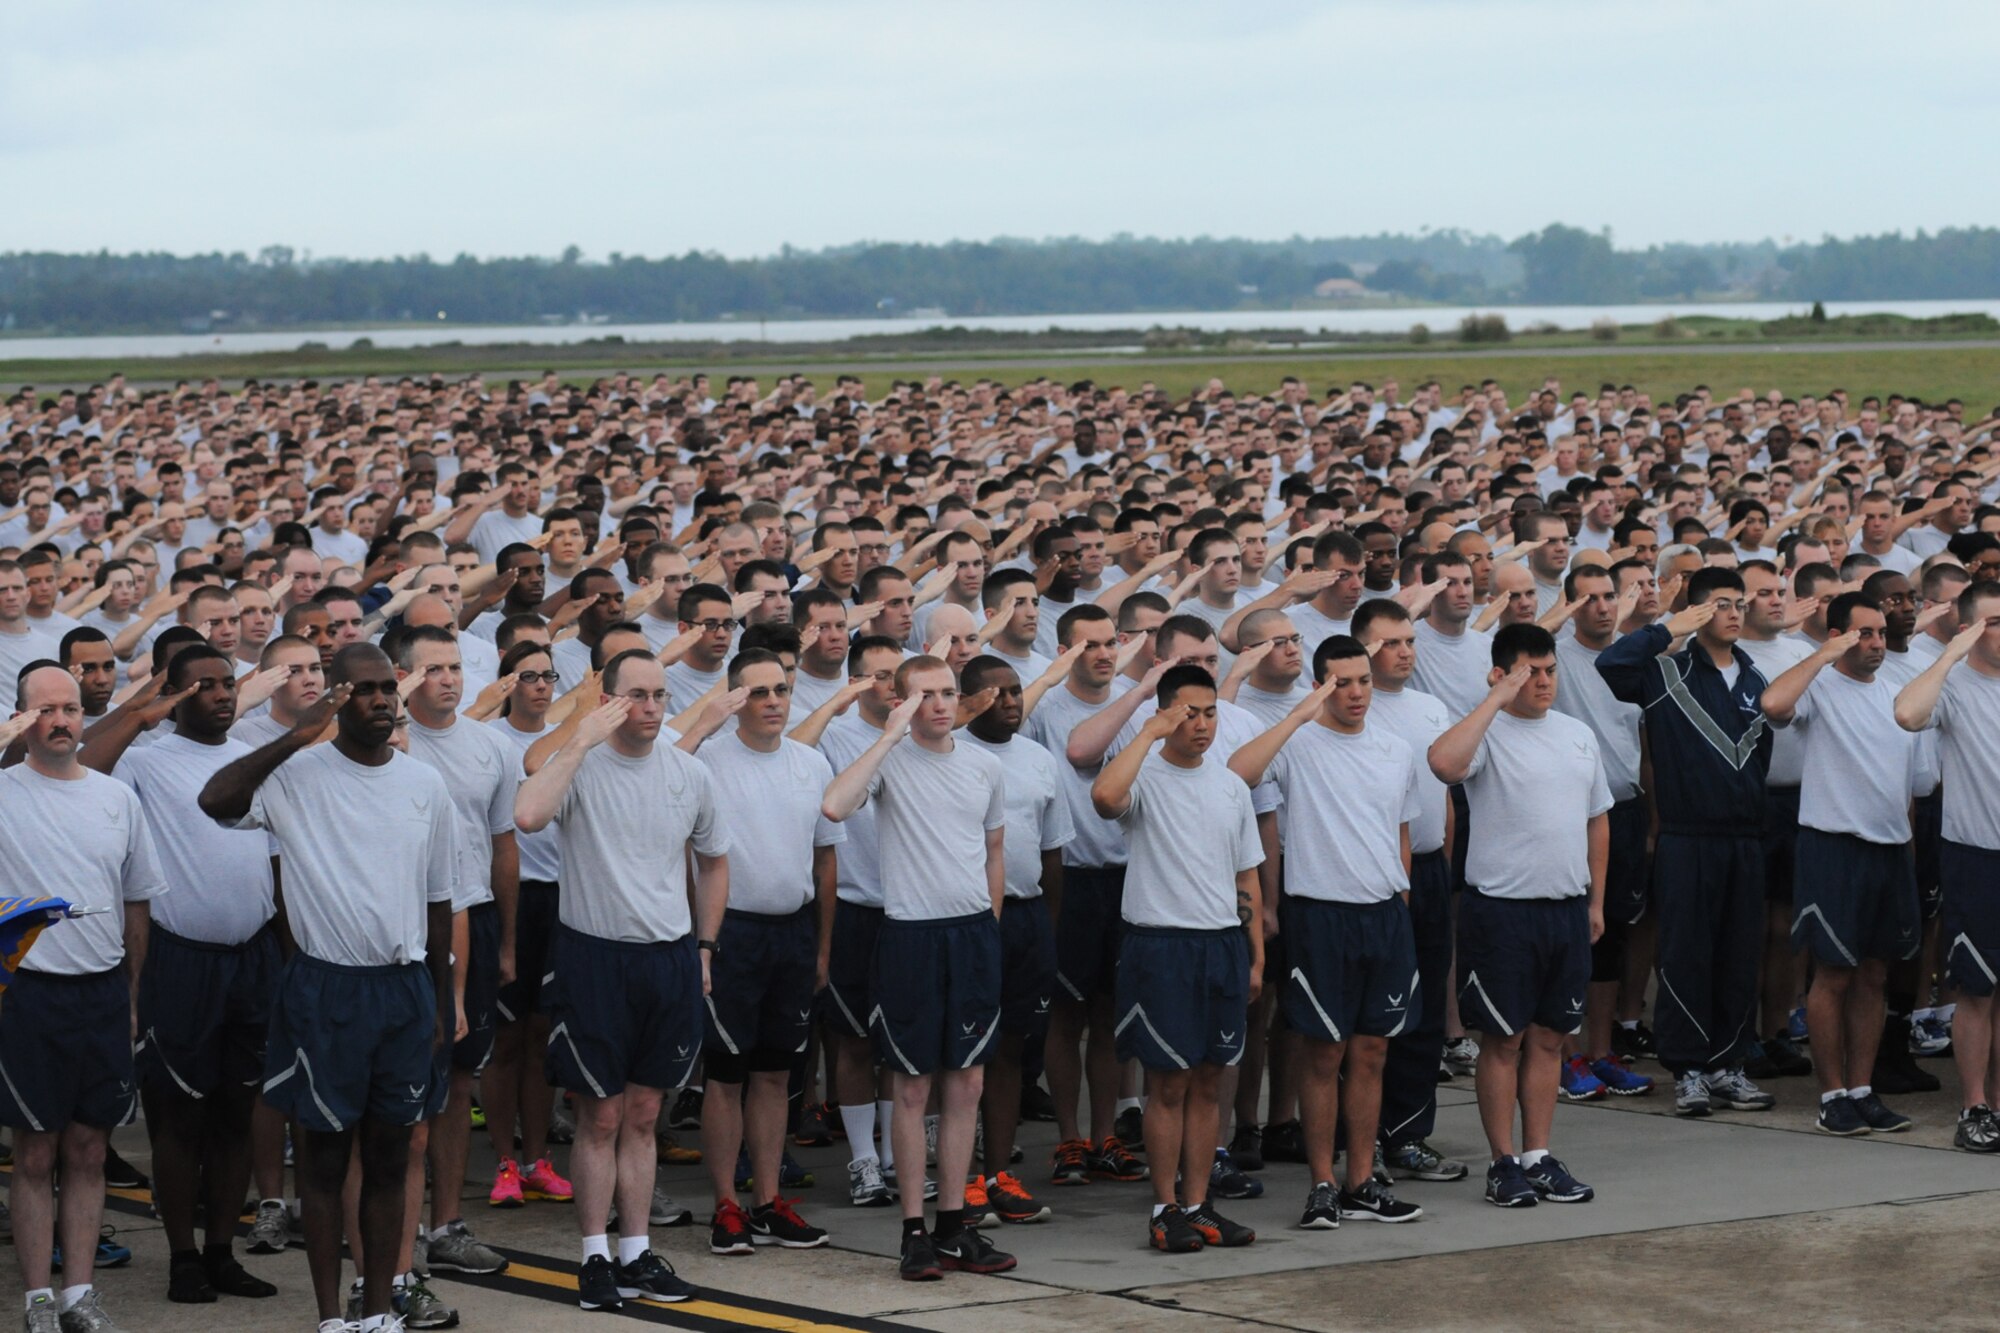 Keesler Airmen render a salute as the National Anthem is sung prior to the start of a 5K run on the flight line Sept. 19, 2014.  The run was the kickoff event for a day full of activities supporting Wingman Day.  (U.S. Air Force photo by Kemberly Groue)